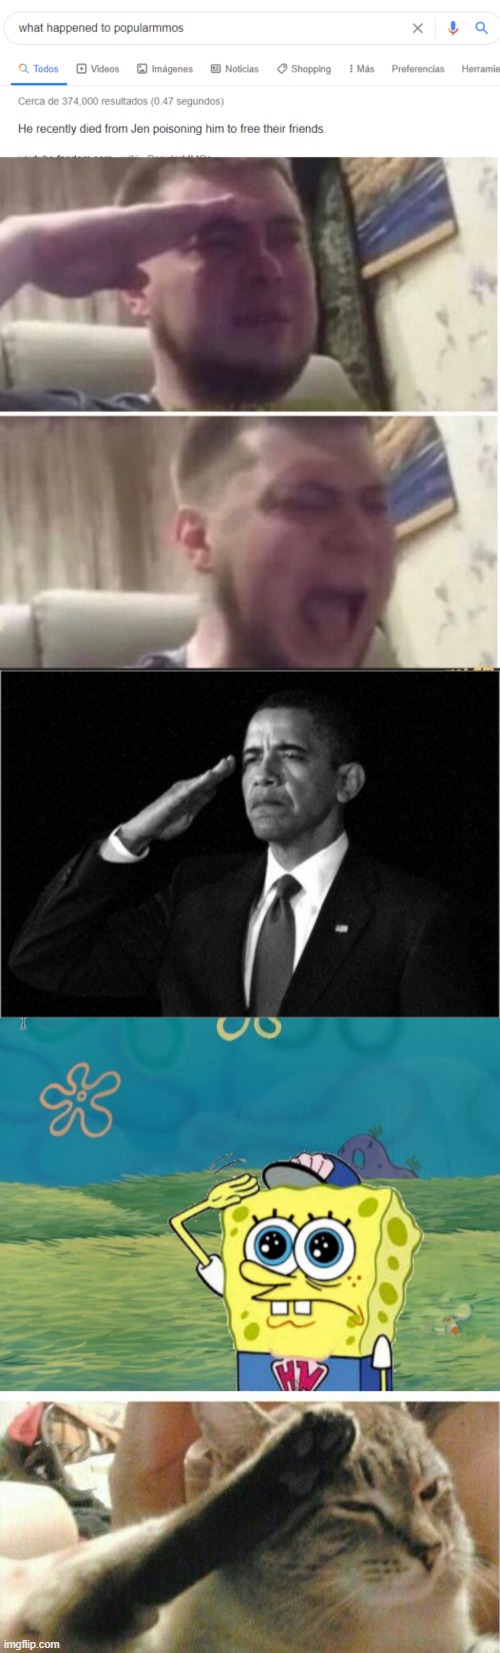 Rest in peace.... you will be remembered | image tagged in crying salute,obama-salute,spongebob salute,cat of honor | made w/ Imgflip meme maker